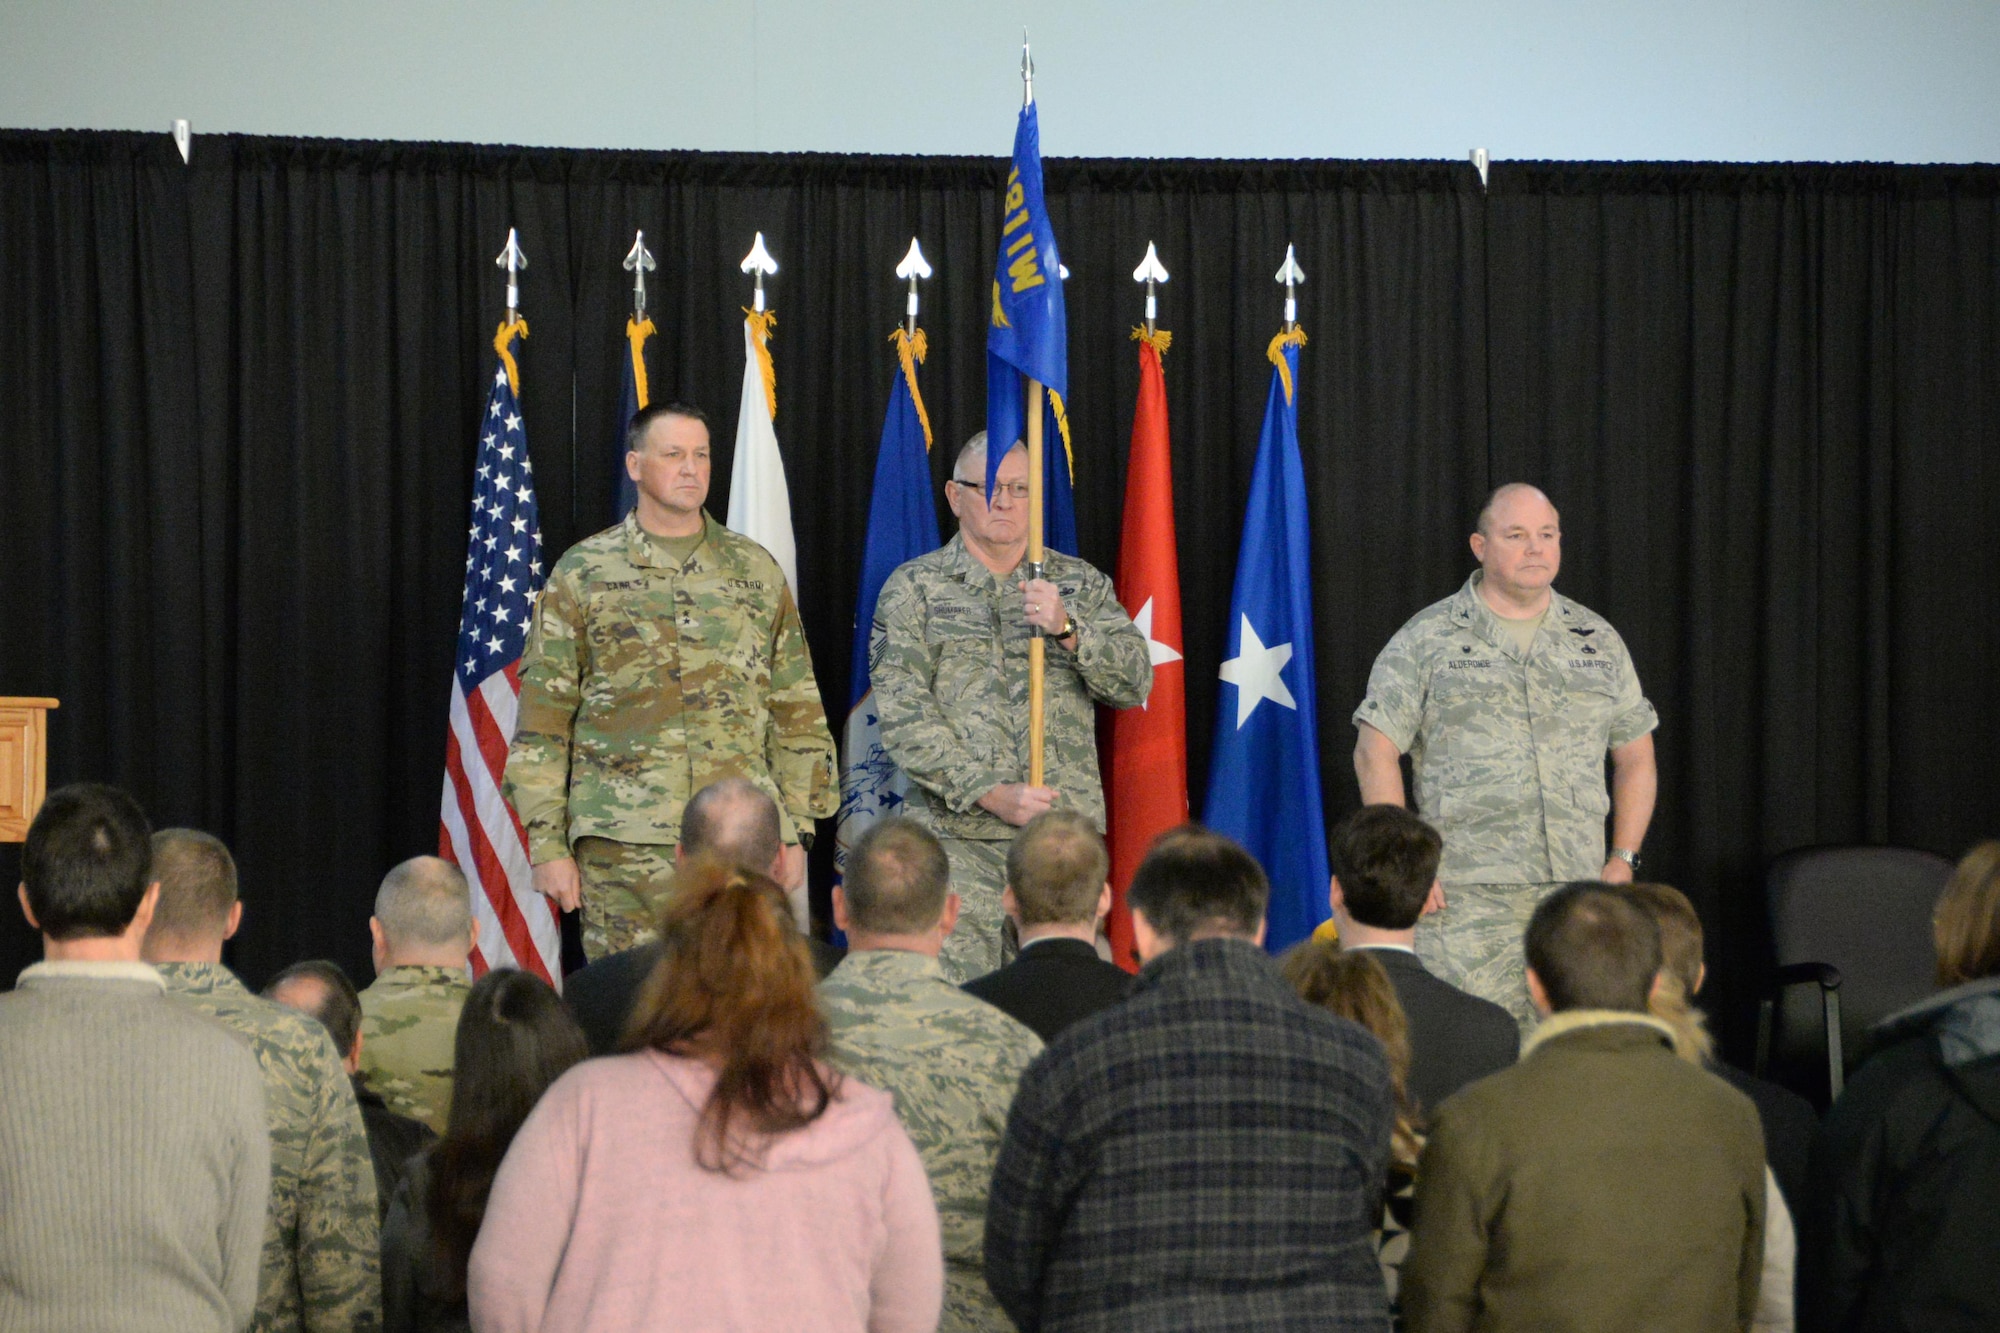 U.S. Air Force Col. Chris Alderdice, right, prepares to assume command of the 181st Intelligence Wing.   The Adjutant General of Indiana Maj. Gen. Courtney P. Carr, left, served as the presiding officer during the assumption of command ceremony, Feb. 4, 2017, at Hulman Field Air National Guard base, Terre Haute, Ind. (U.S. Air National Guard photo by Senior Airman Kevin D. Schulze)